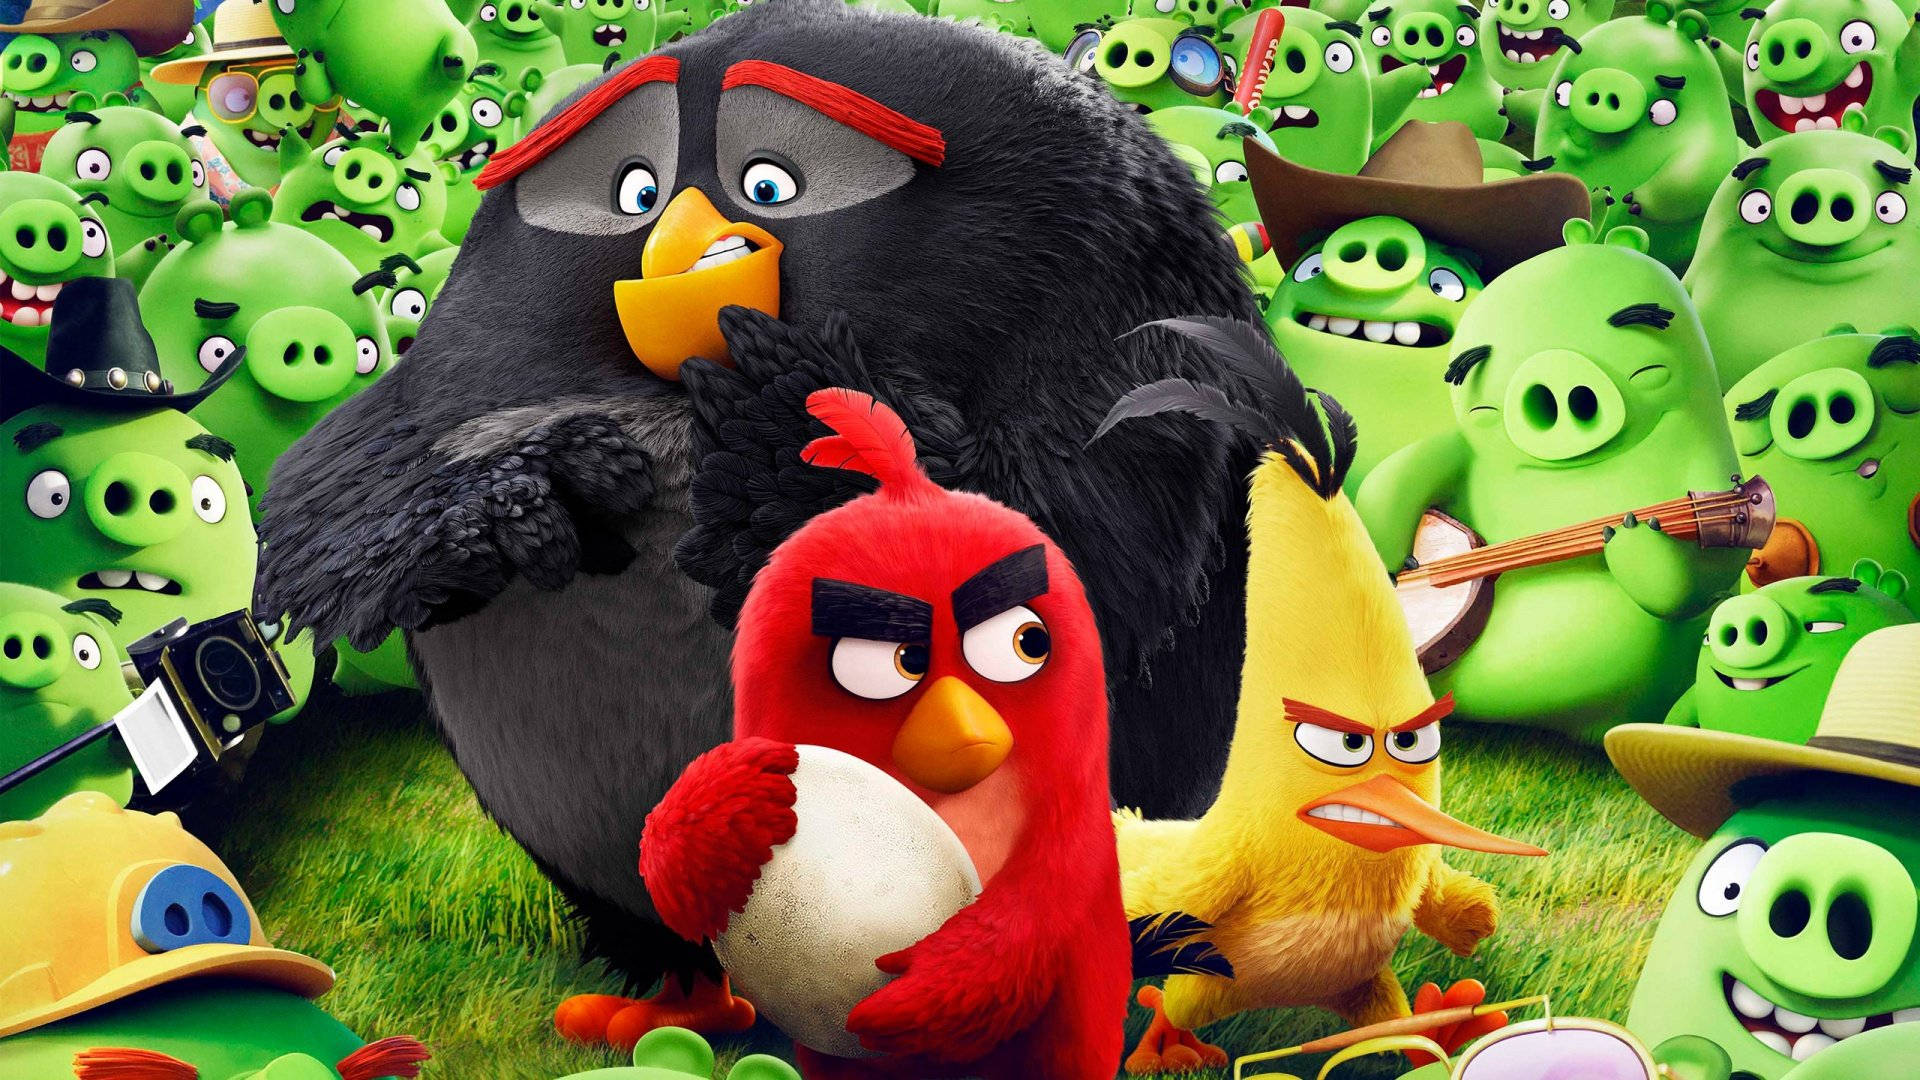 The Heroes From The Angry Birds Movie Wallpaper